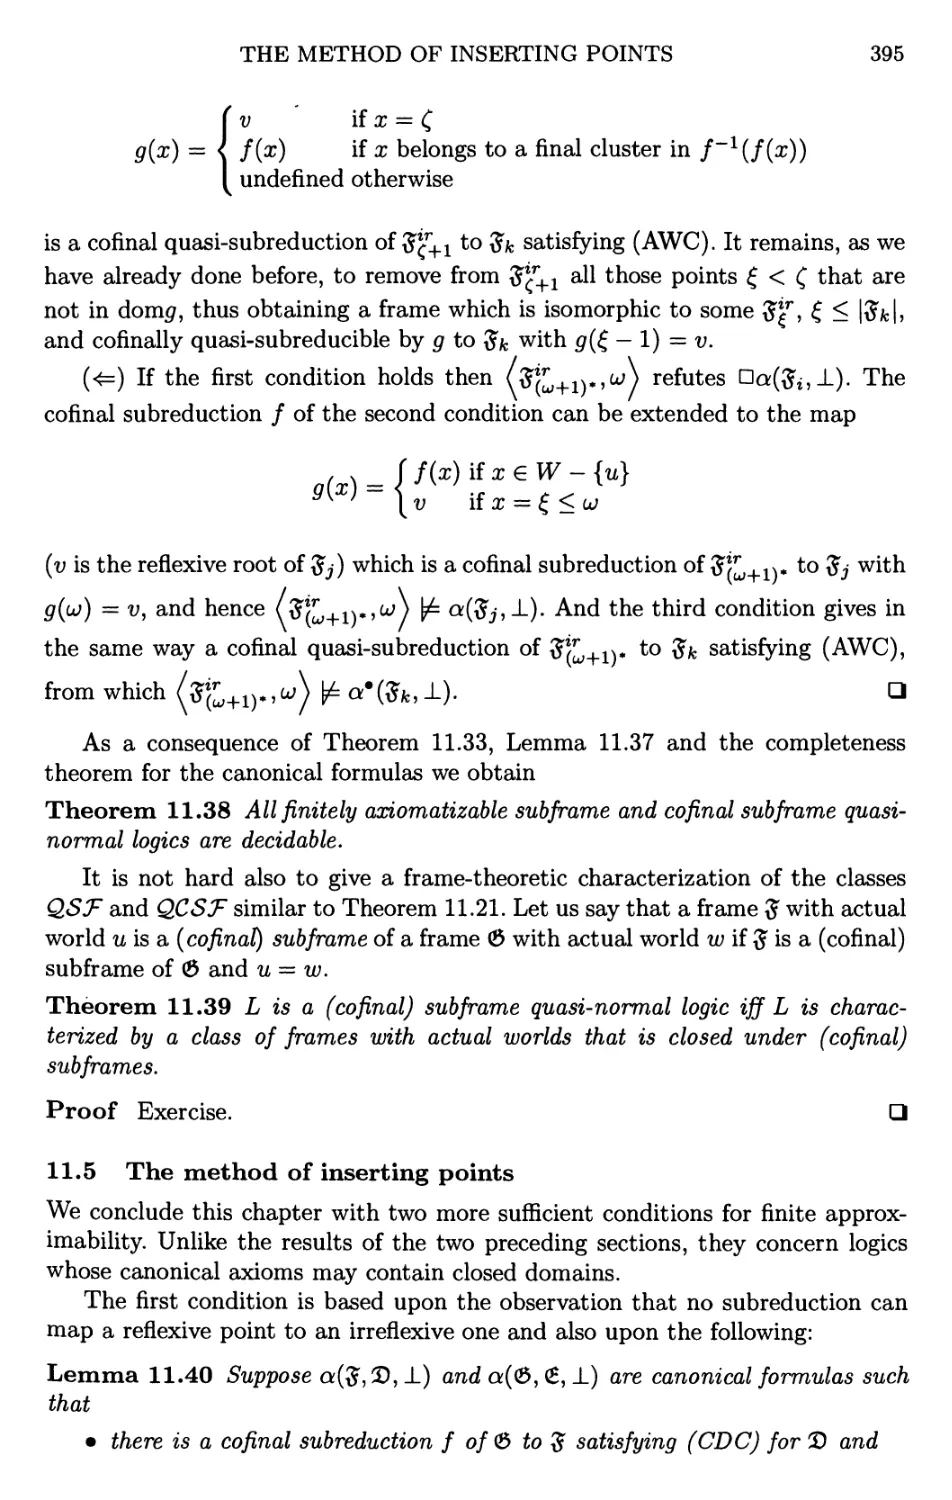 11.5 The method of inserting points